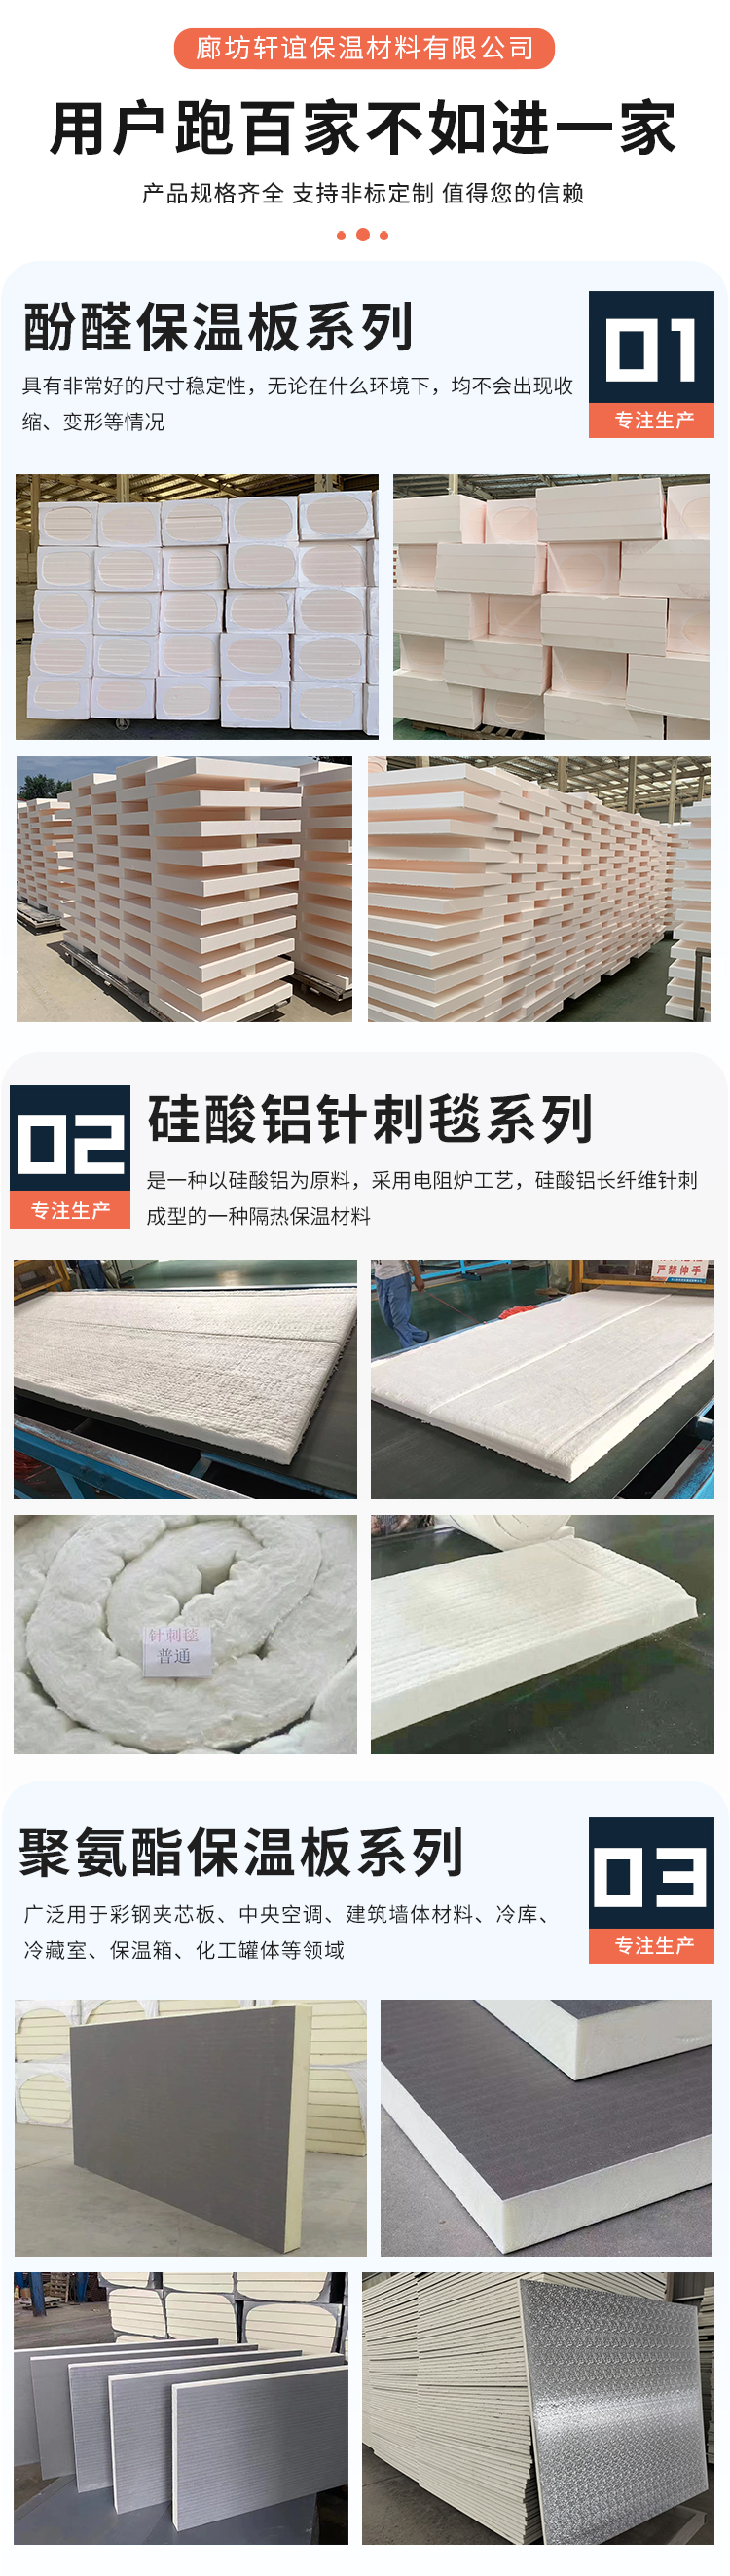 Hard foam polyurethane insulation board, exterior wall, roof, cold storage insulation material, PU foam composite board, attentive after-sales service